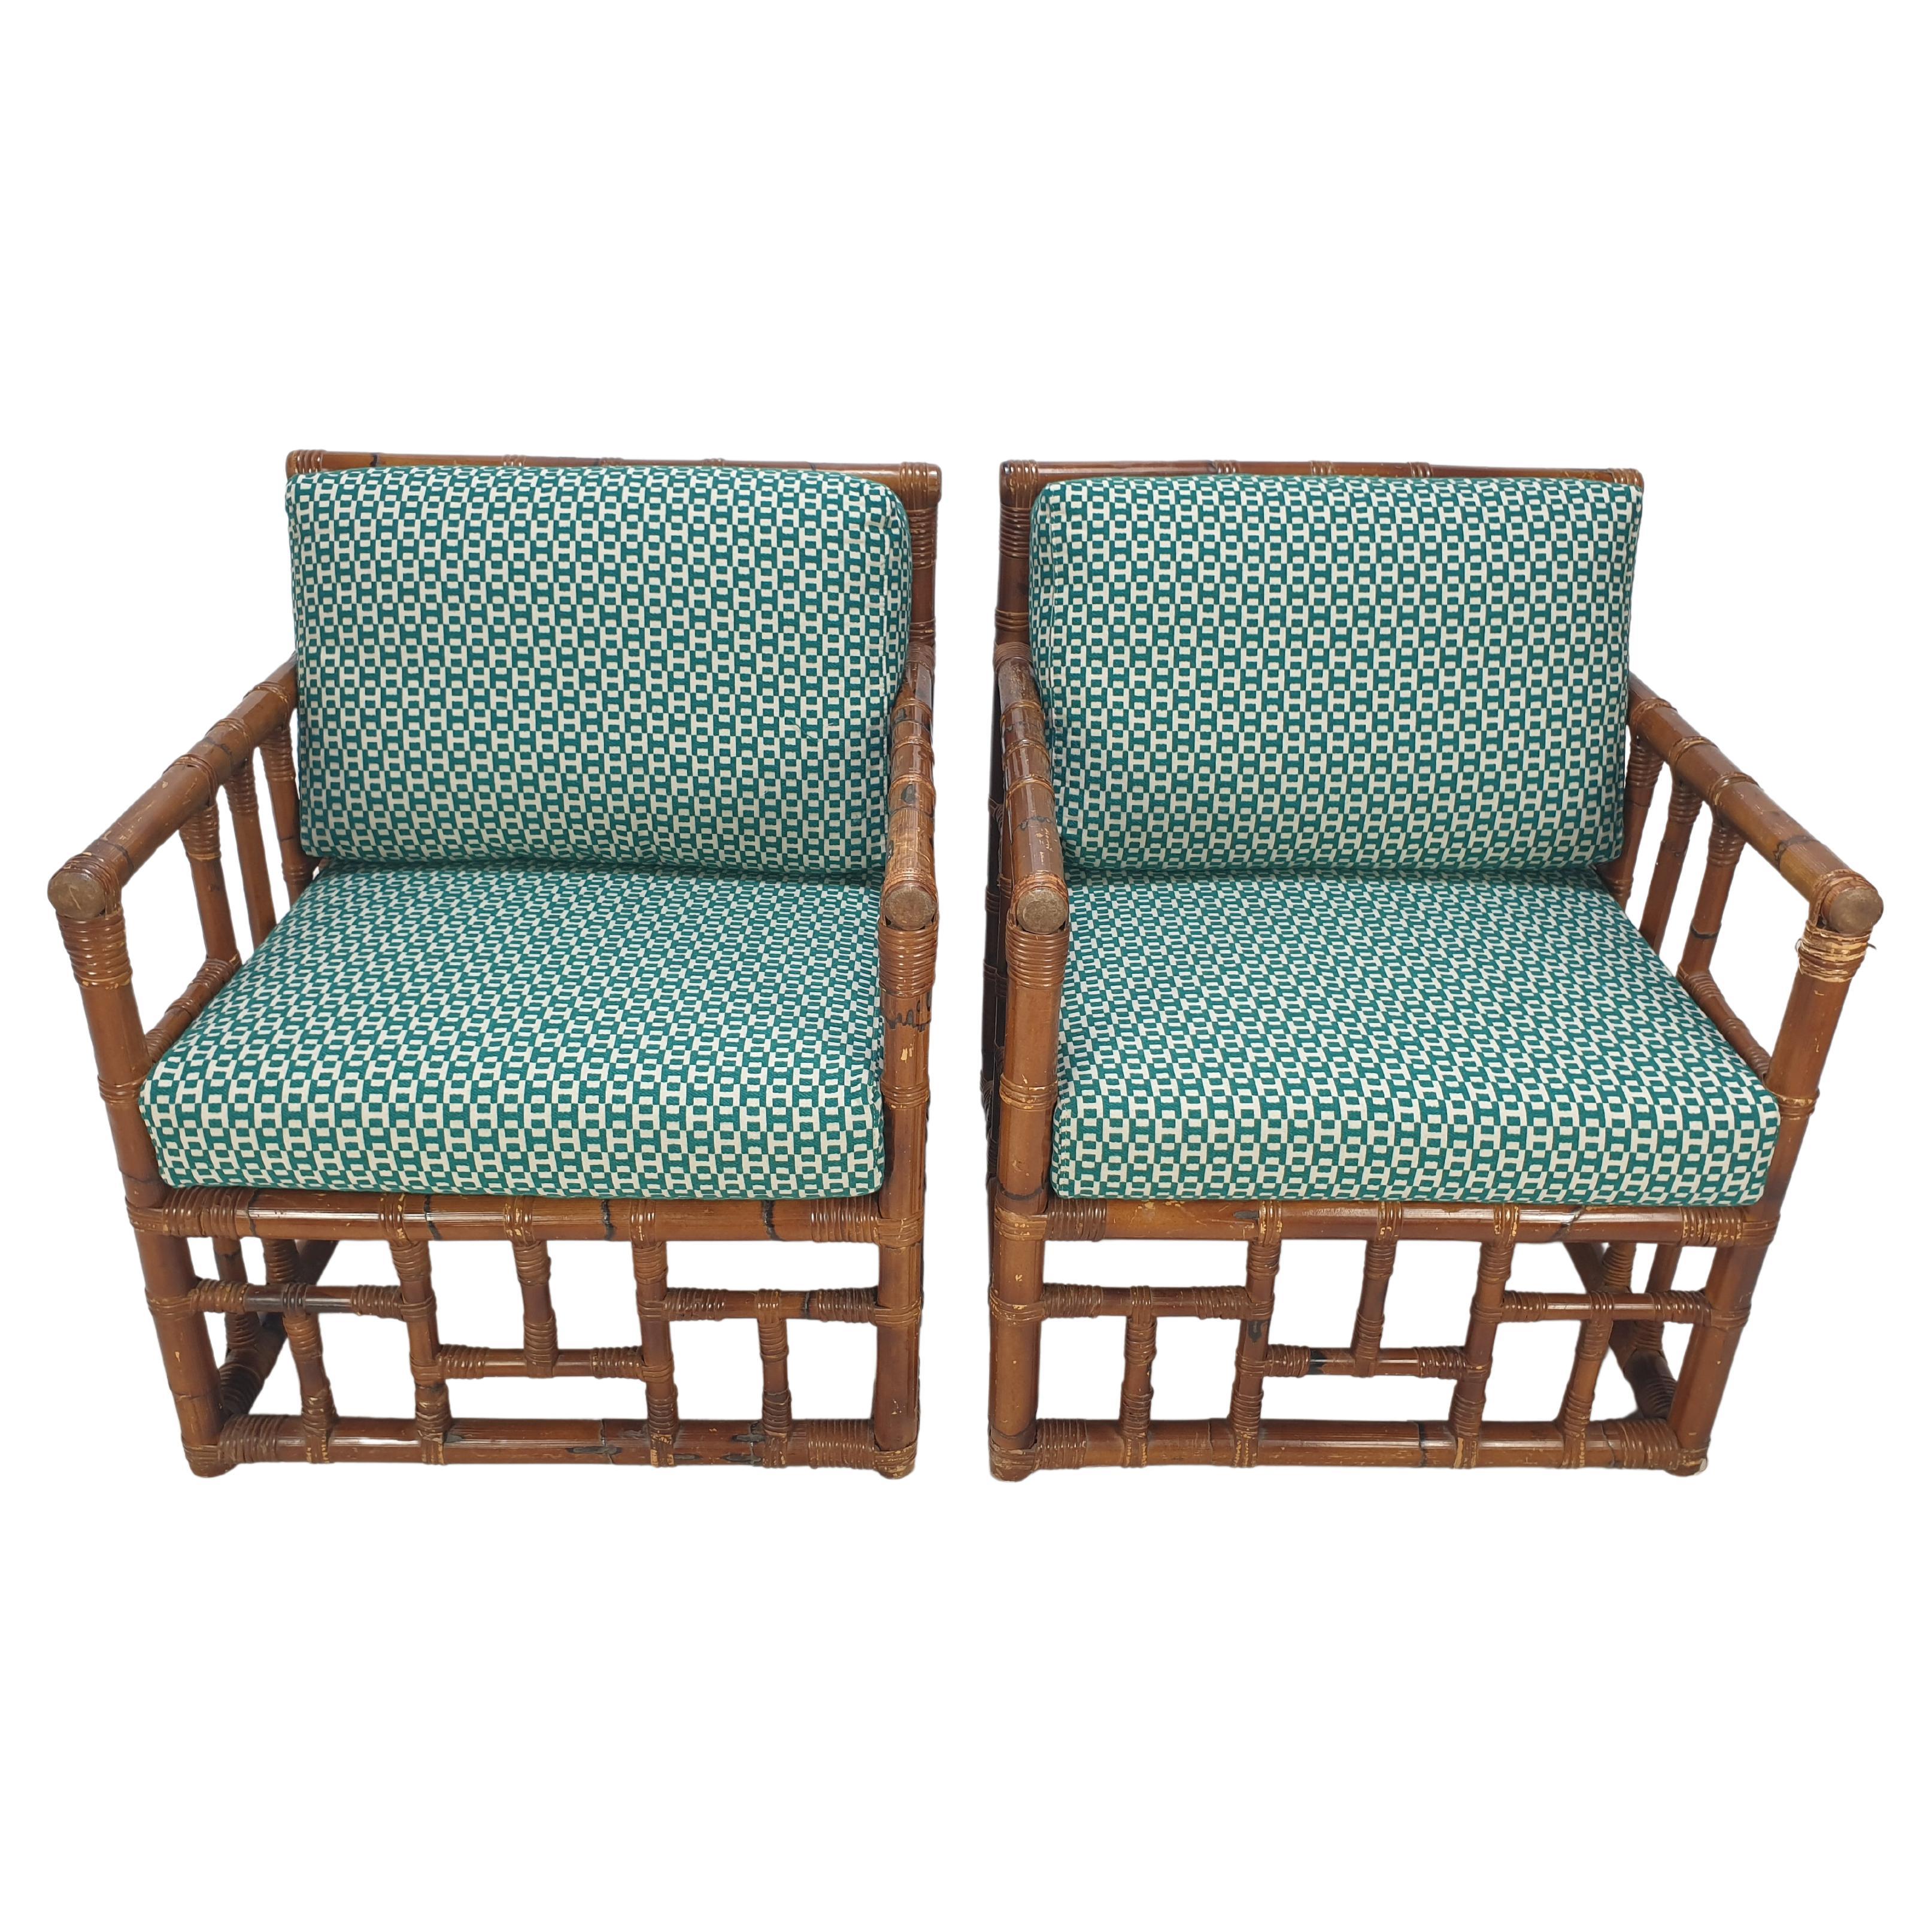 Pair of Italian Bamboo Lounge Chairs with Hermès Upholstery, 1970's For Sale